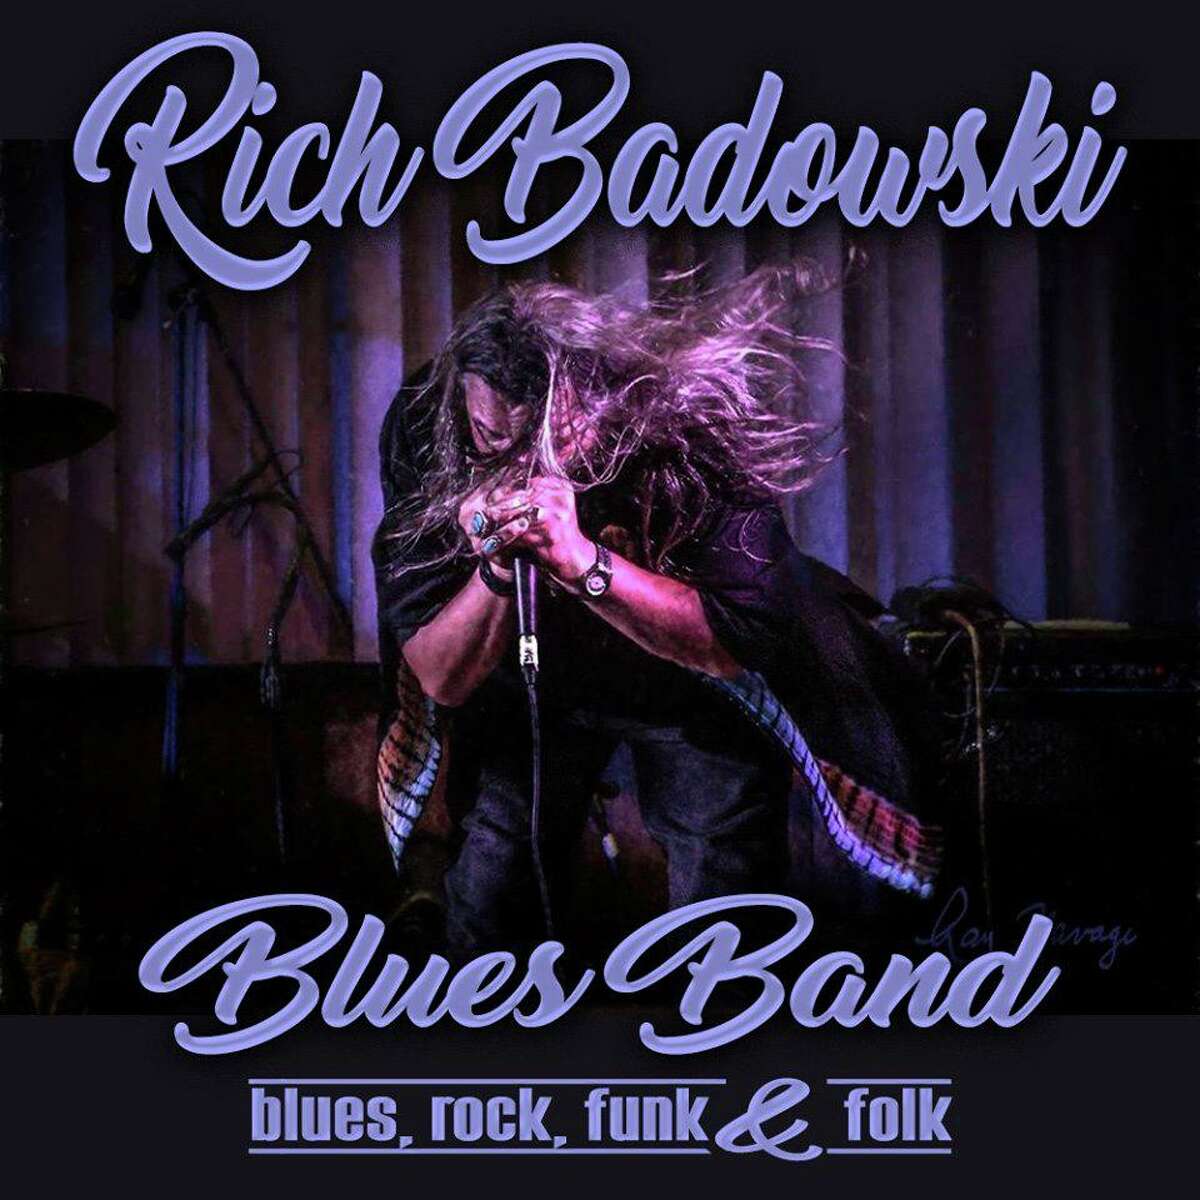 The Rich Badowski Blues Band is performing Sunday in Blues for Ukraine in New Britain, a fundraiser.